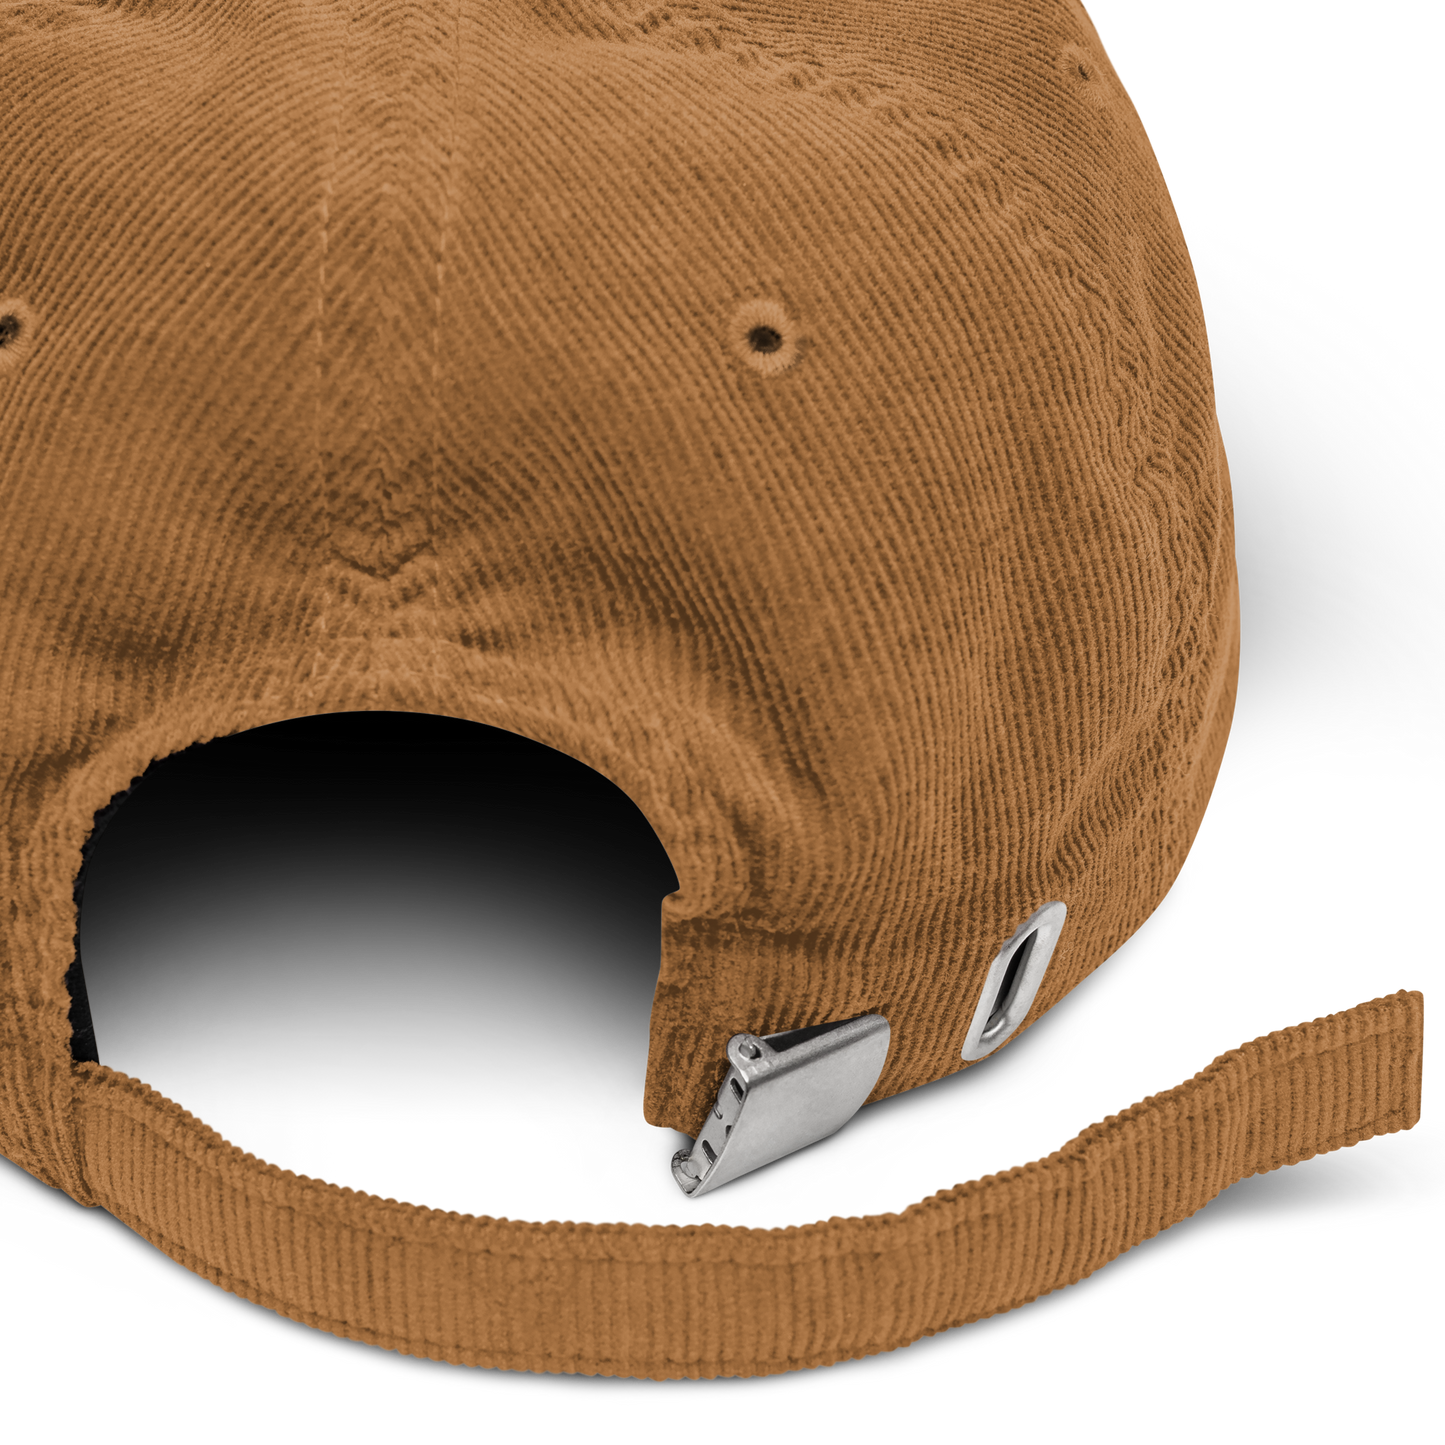 Q - The letter collection - Corduroy hat